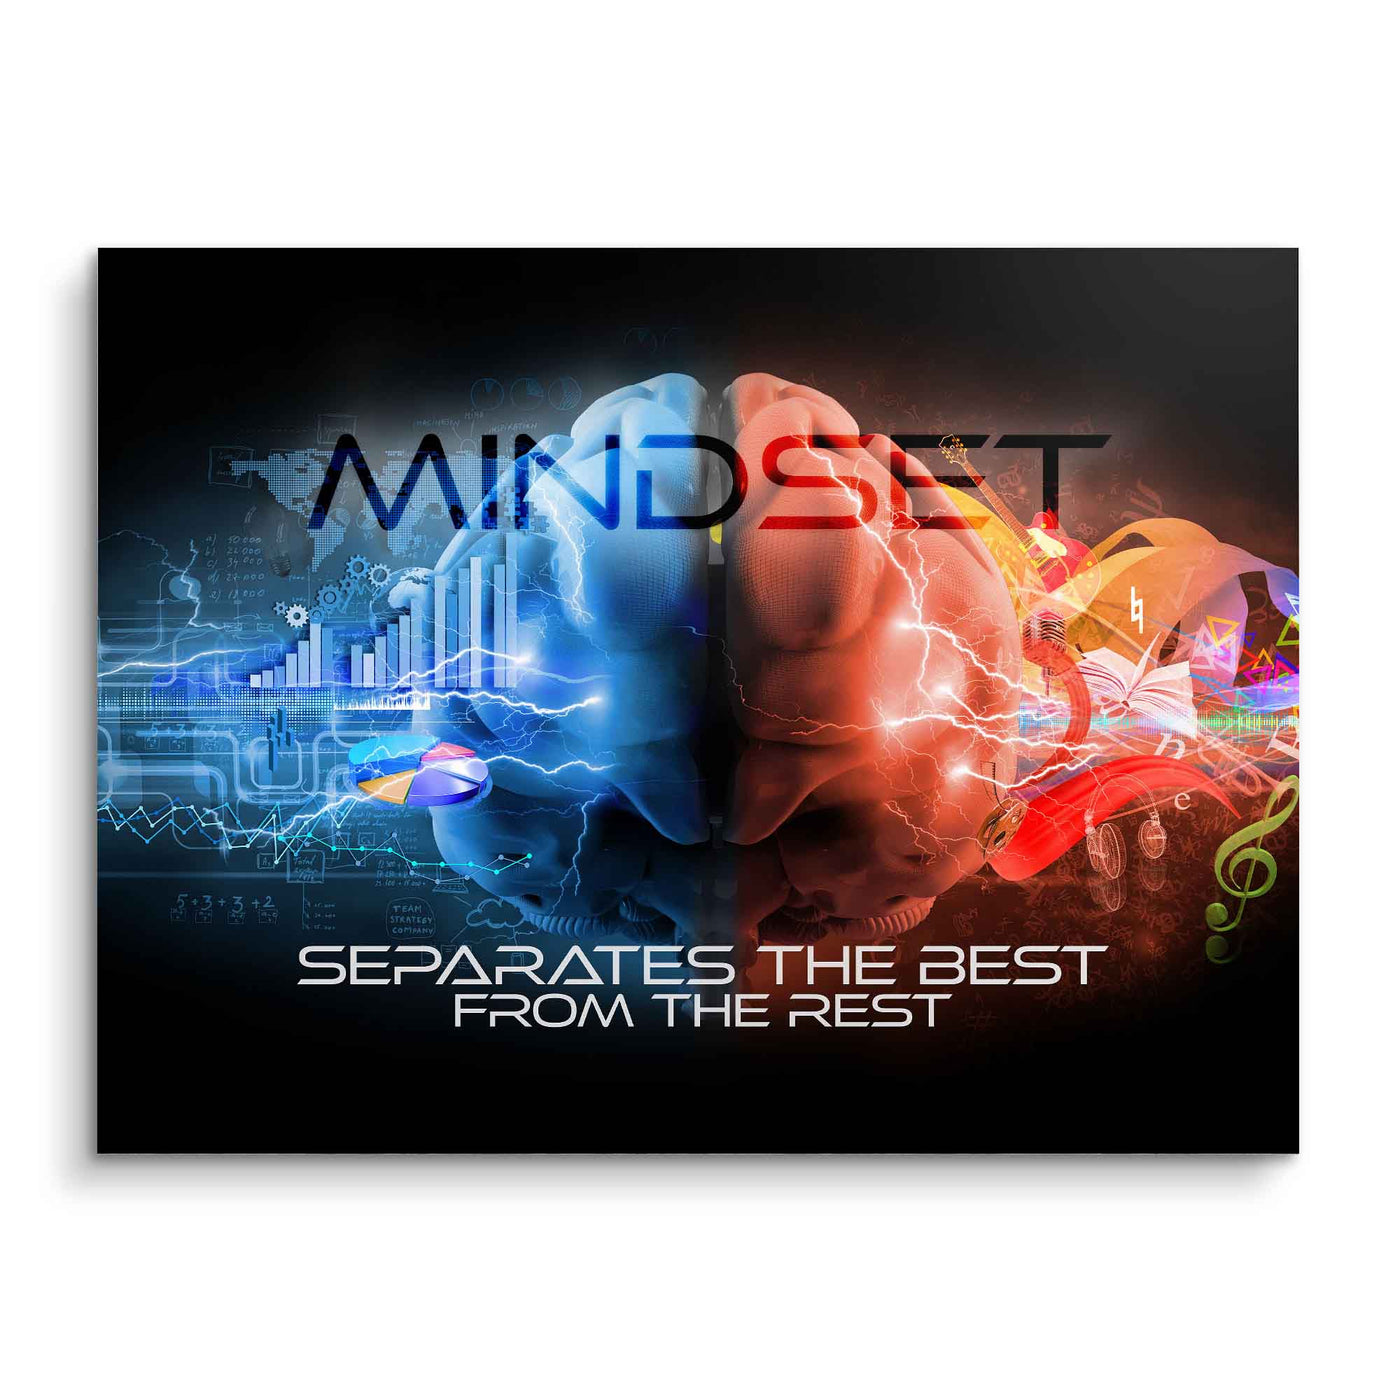 Mindset - be the best